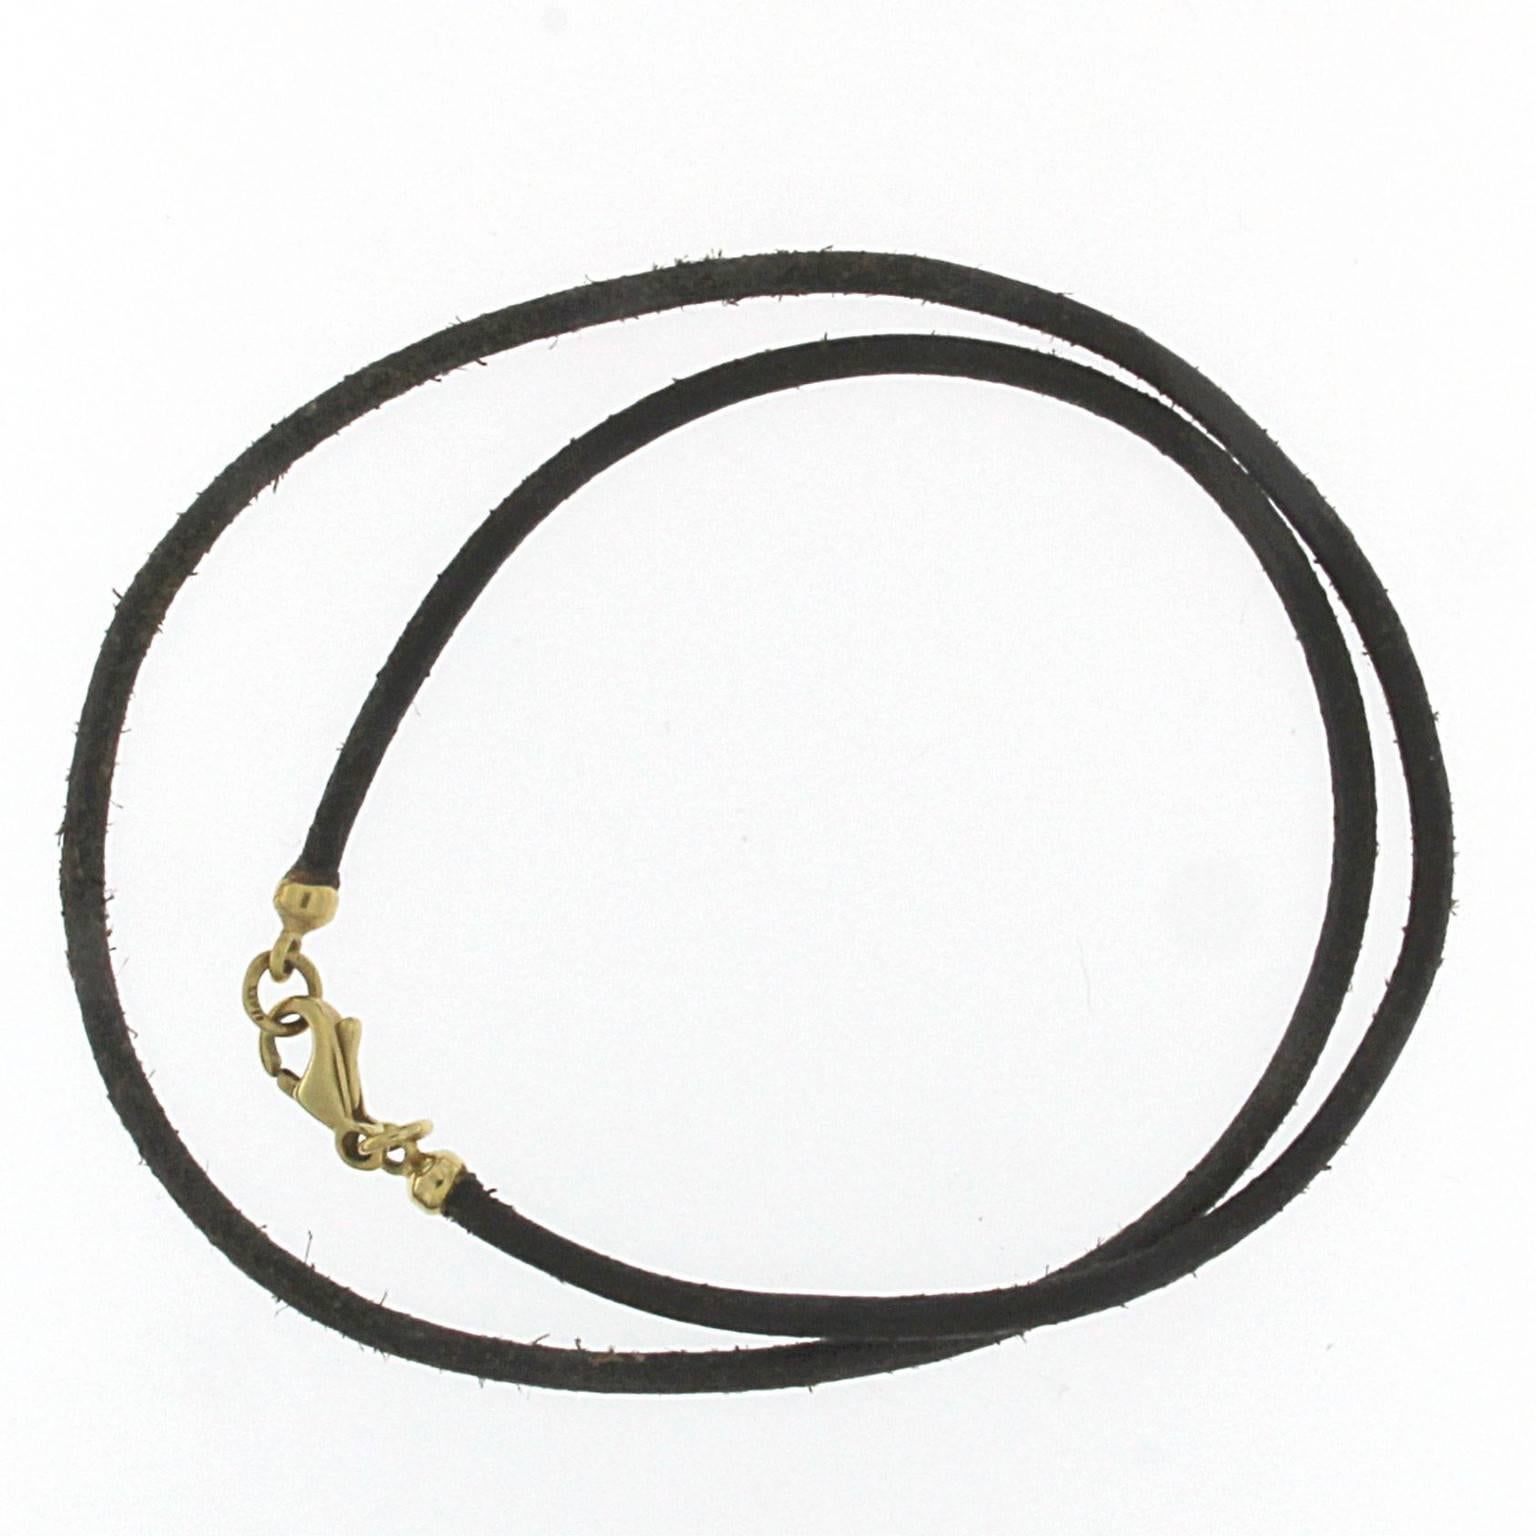 Leather cord with lobster clasp in yellow gold 
18kt gold total weight: gr 1.00